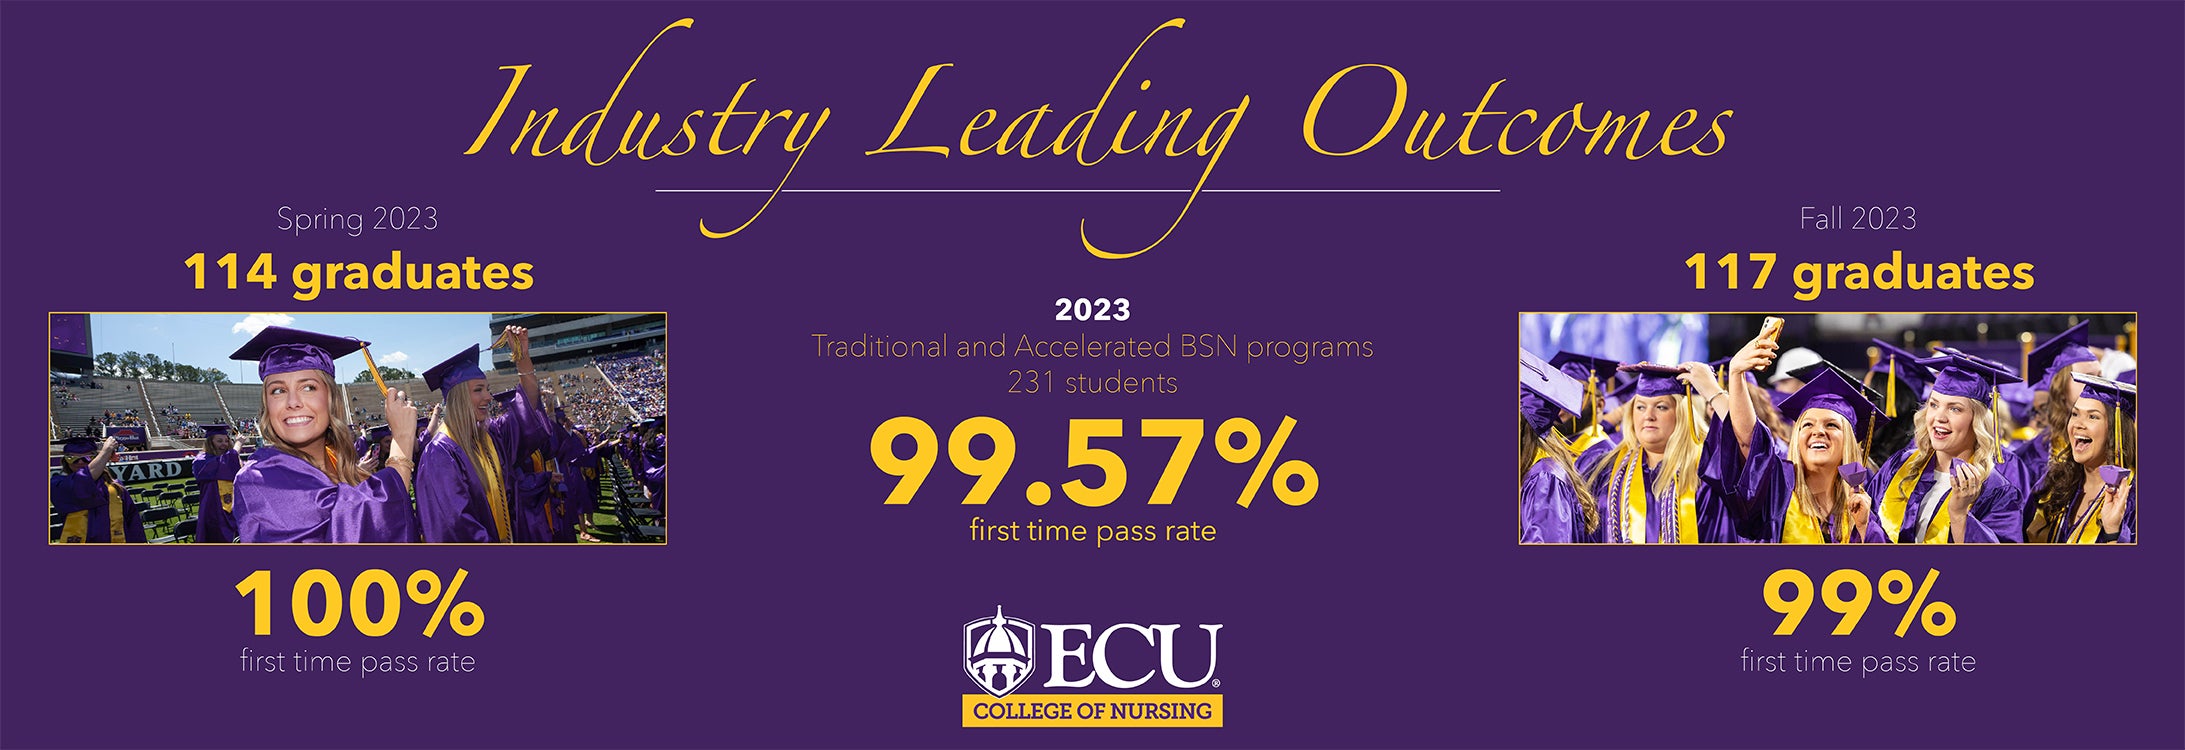 An image describing the 2023 ECU College of Nursing NCLEX first time pass rates, including the Spring and Fall classes. The yearly average is shown at 99.57% and two images of graduating nursing students are accompanied by text that indicate a 100% first time pass rate for the Spring 2023 class and a 99% first time pass rate for the Fall 2024 class.